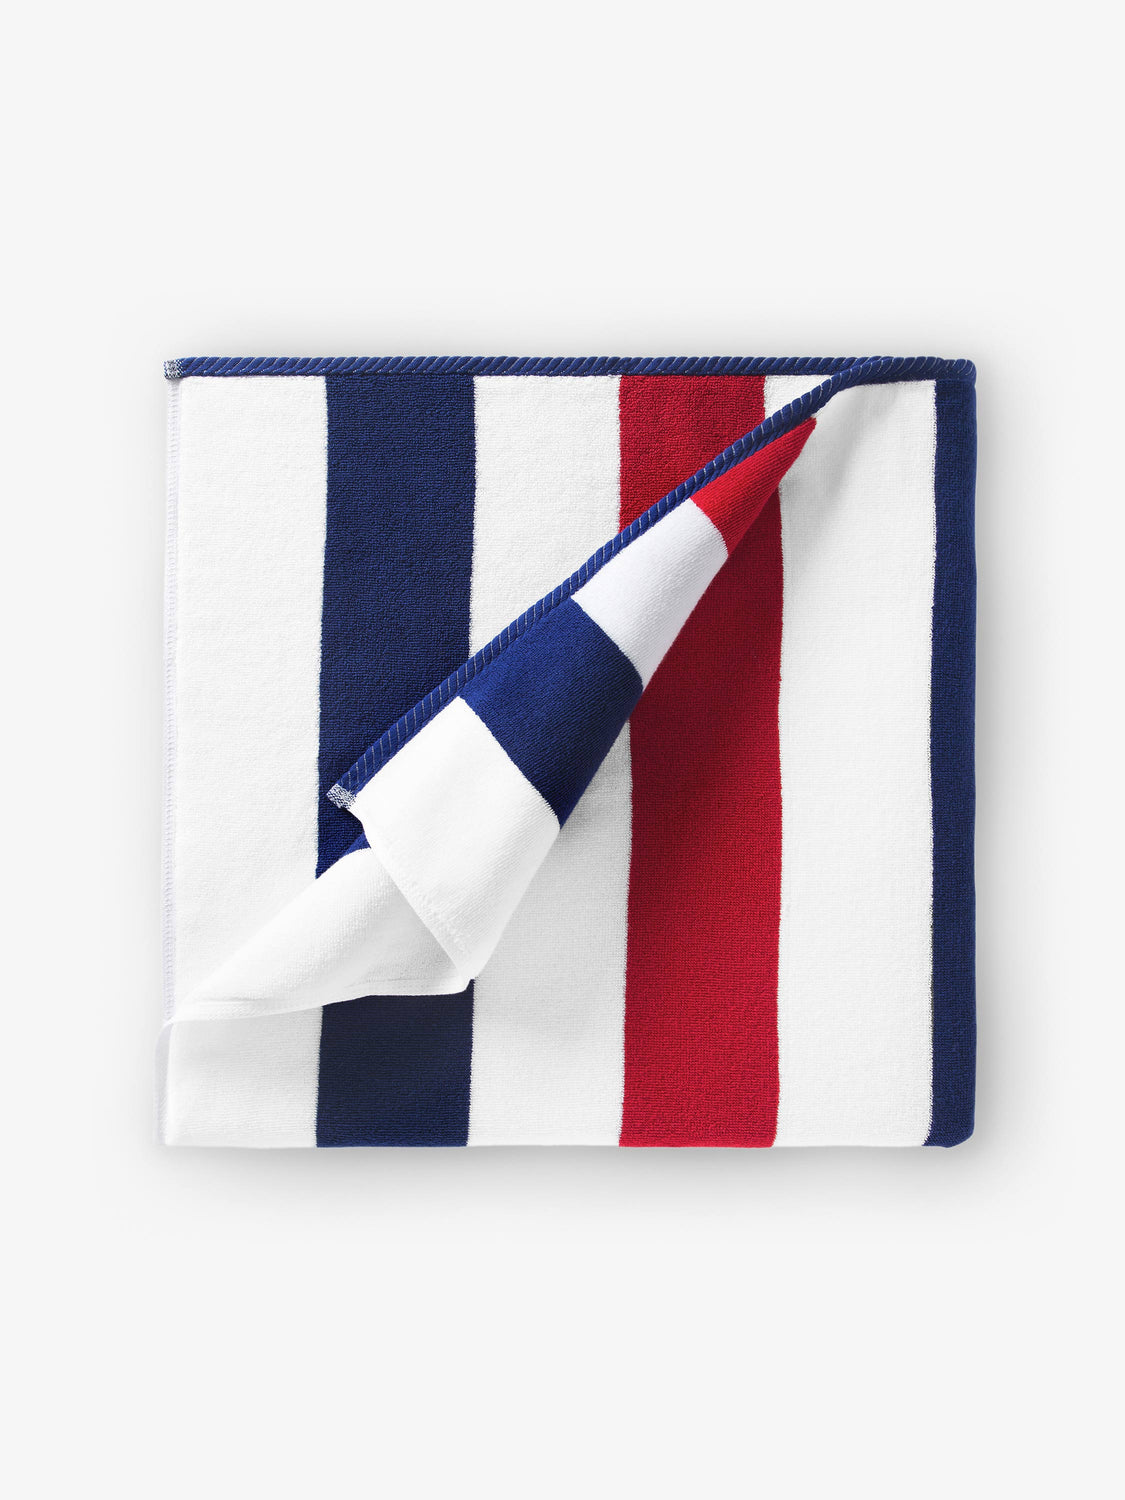 A folded red, white, and blue striped cabana beach towel.